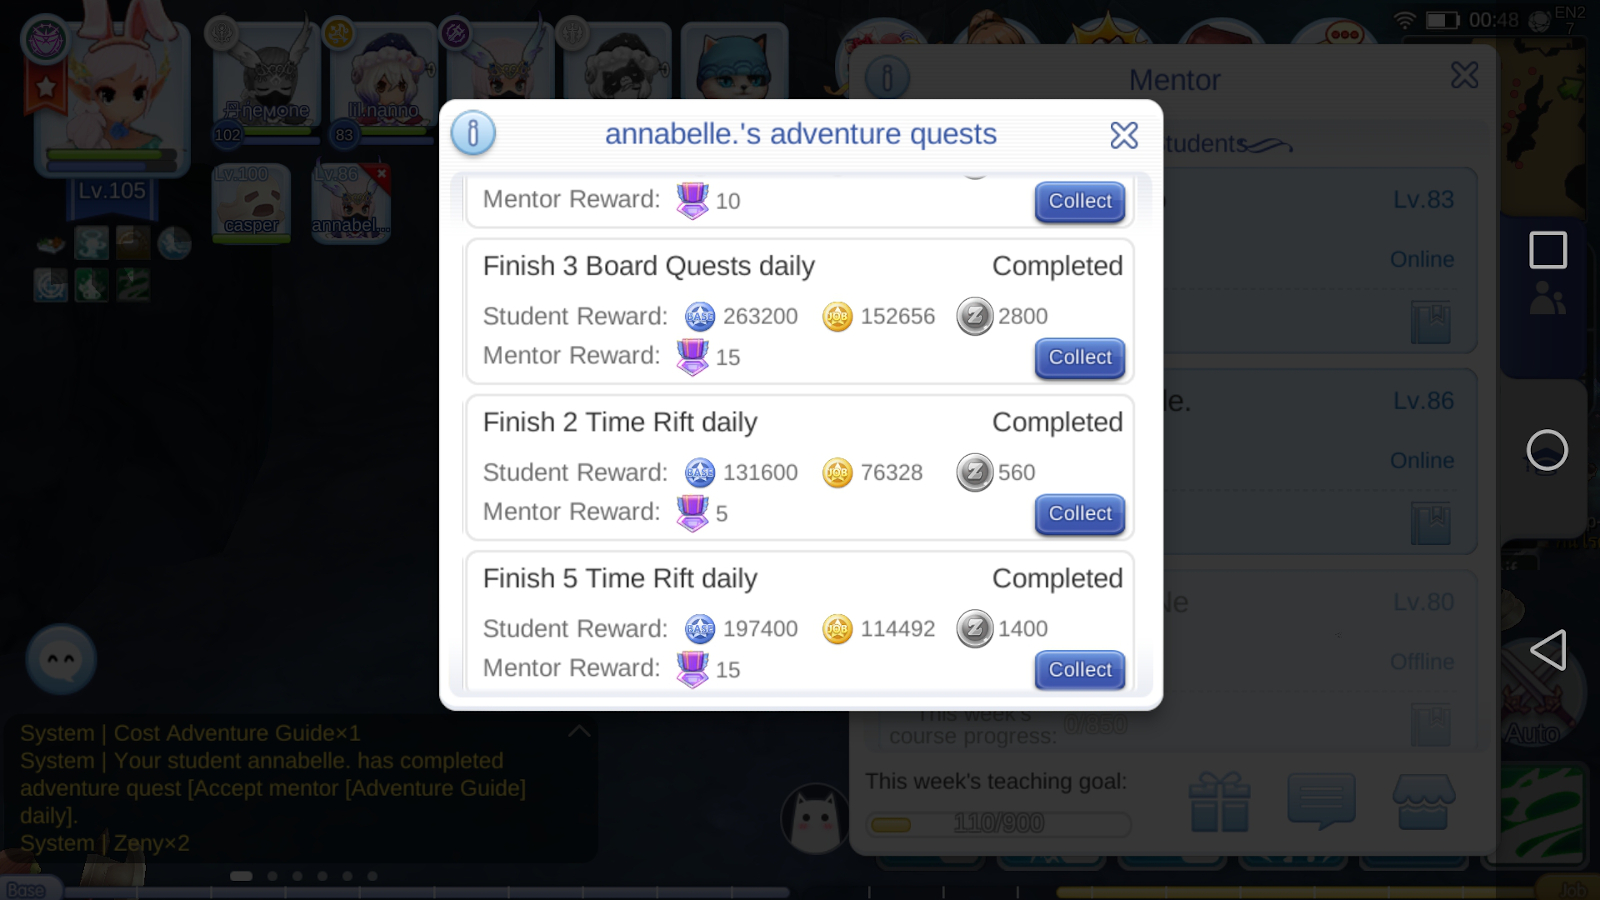 Complete Student Daily Adventure Quests